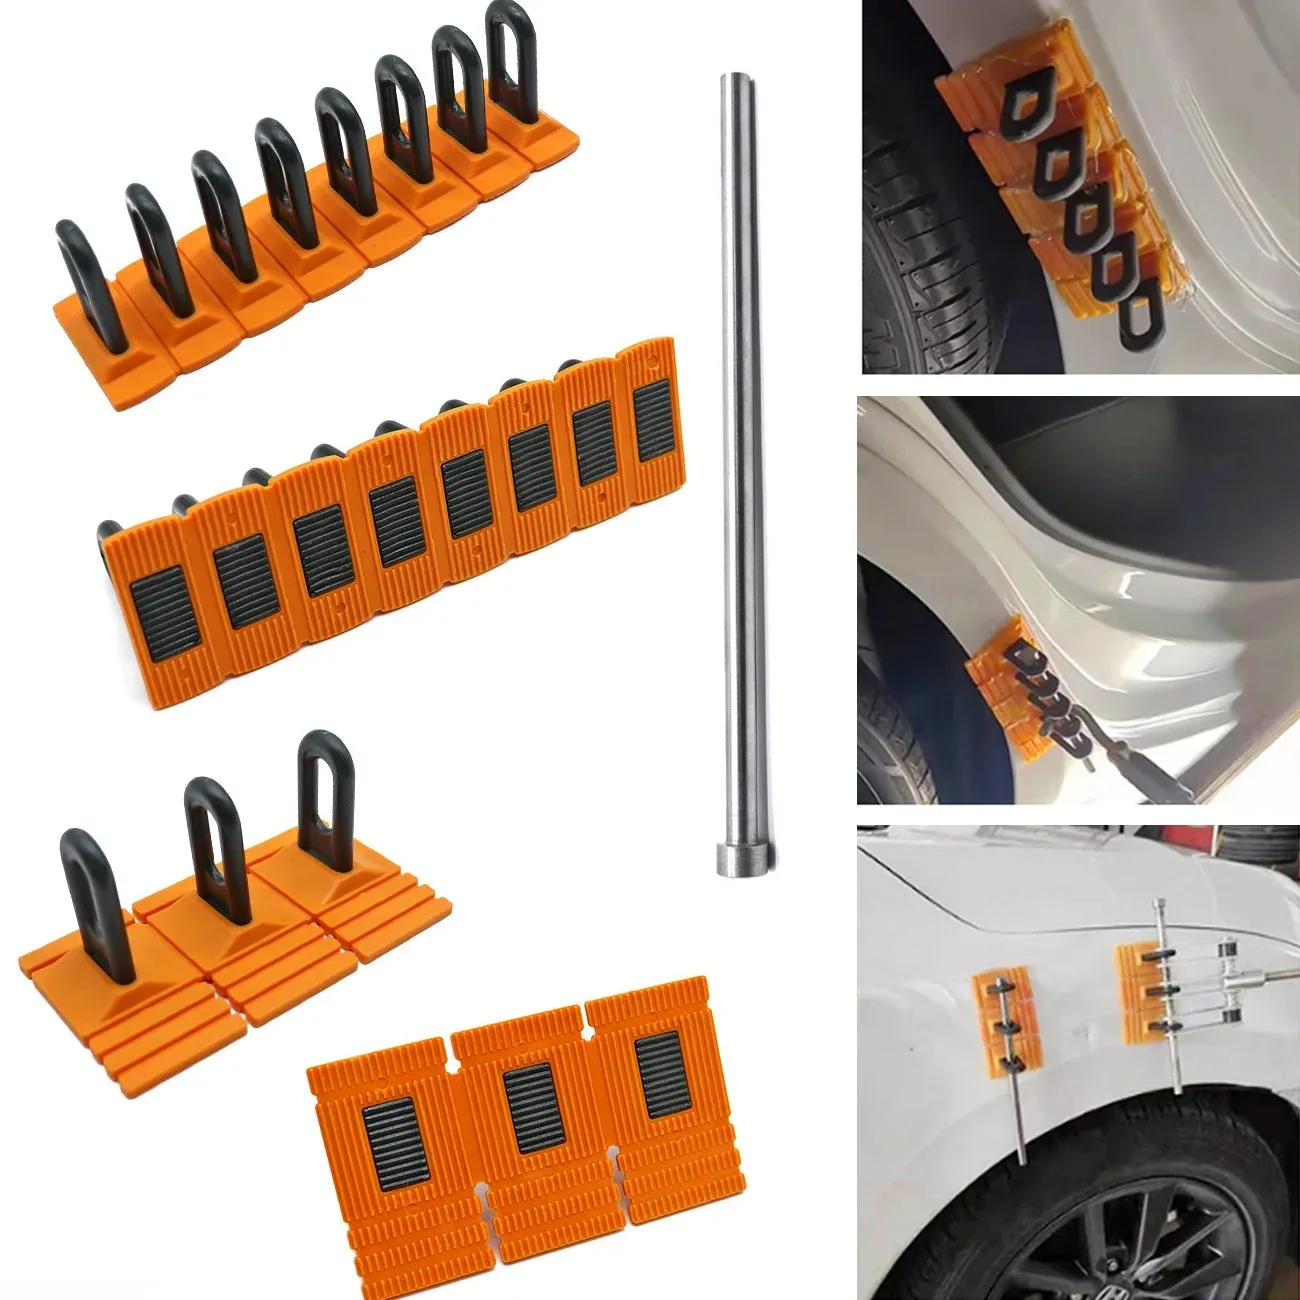 

Car Paintless Dent Repair Puller Tools Handle Lifter Glue Tabs Powerful Body Remover Auto Kit Automotive Mechanic Stance Pdr